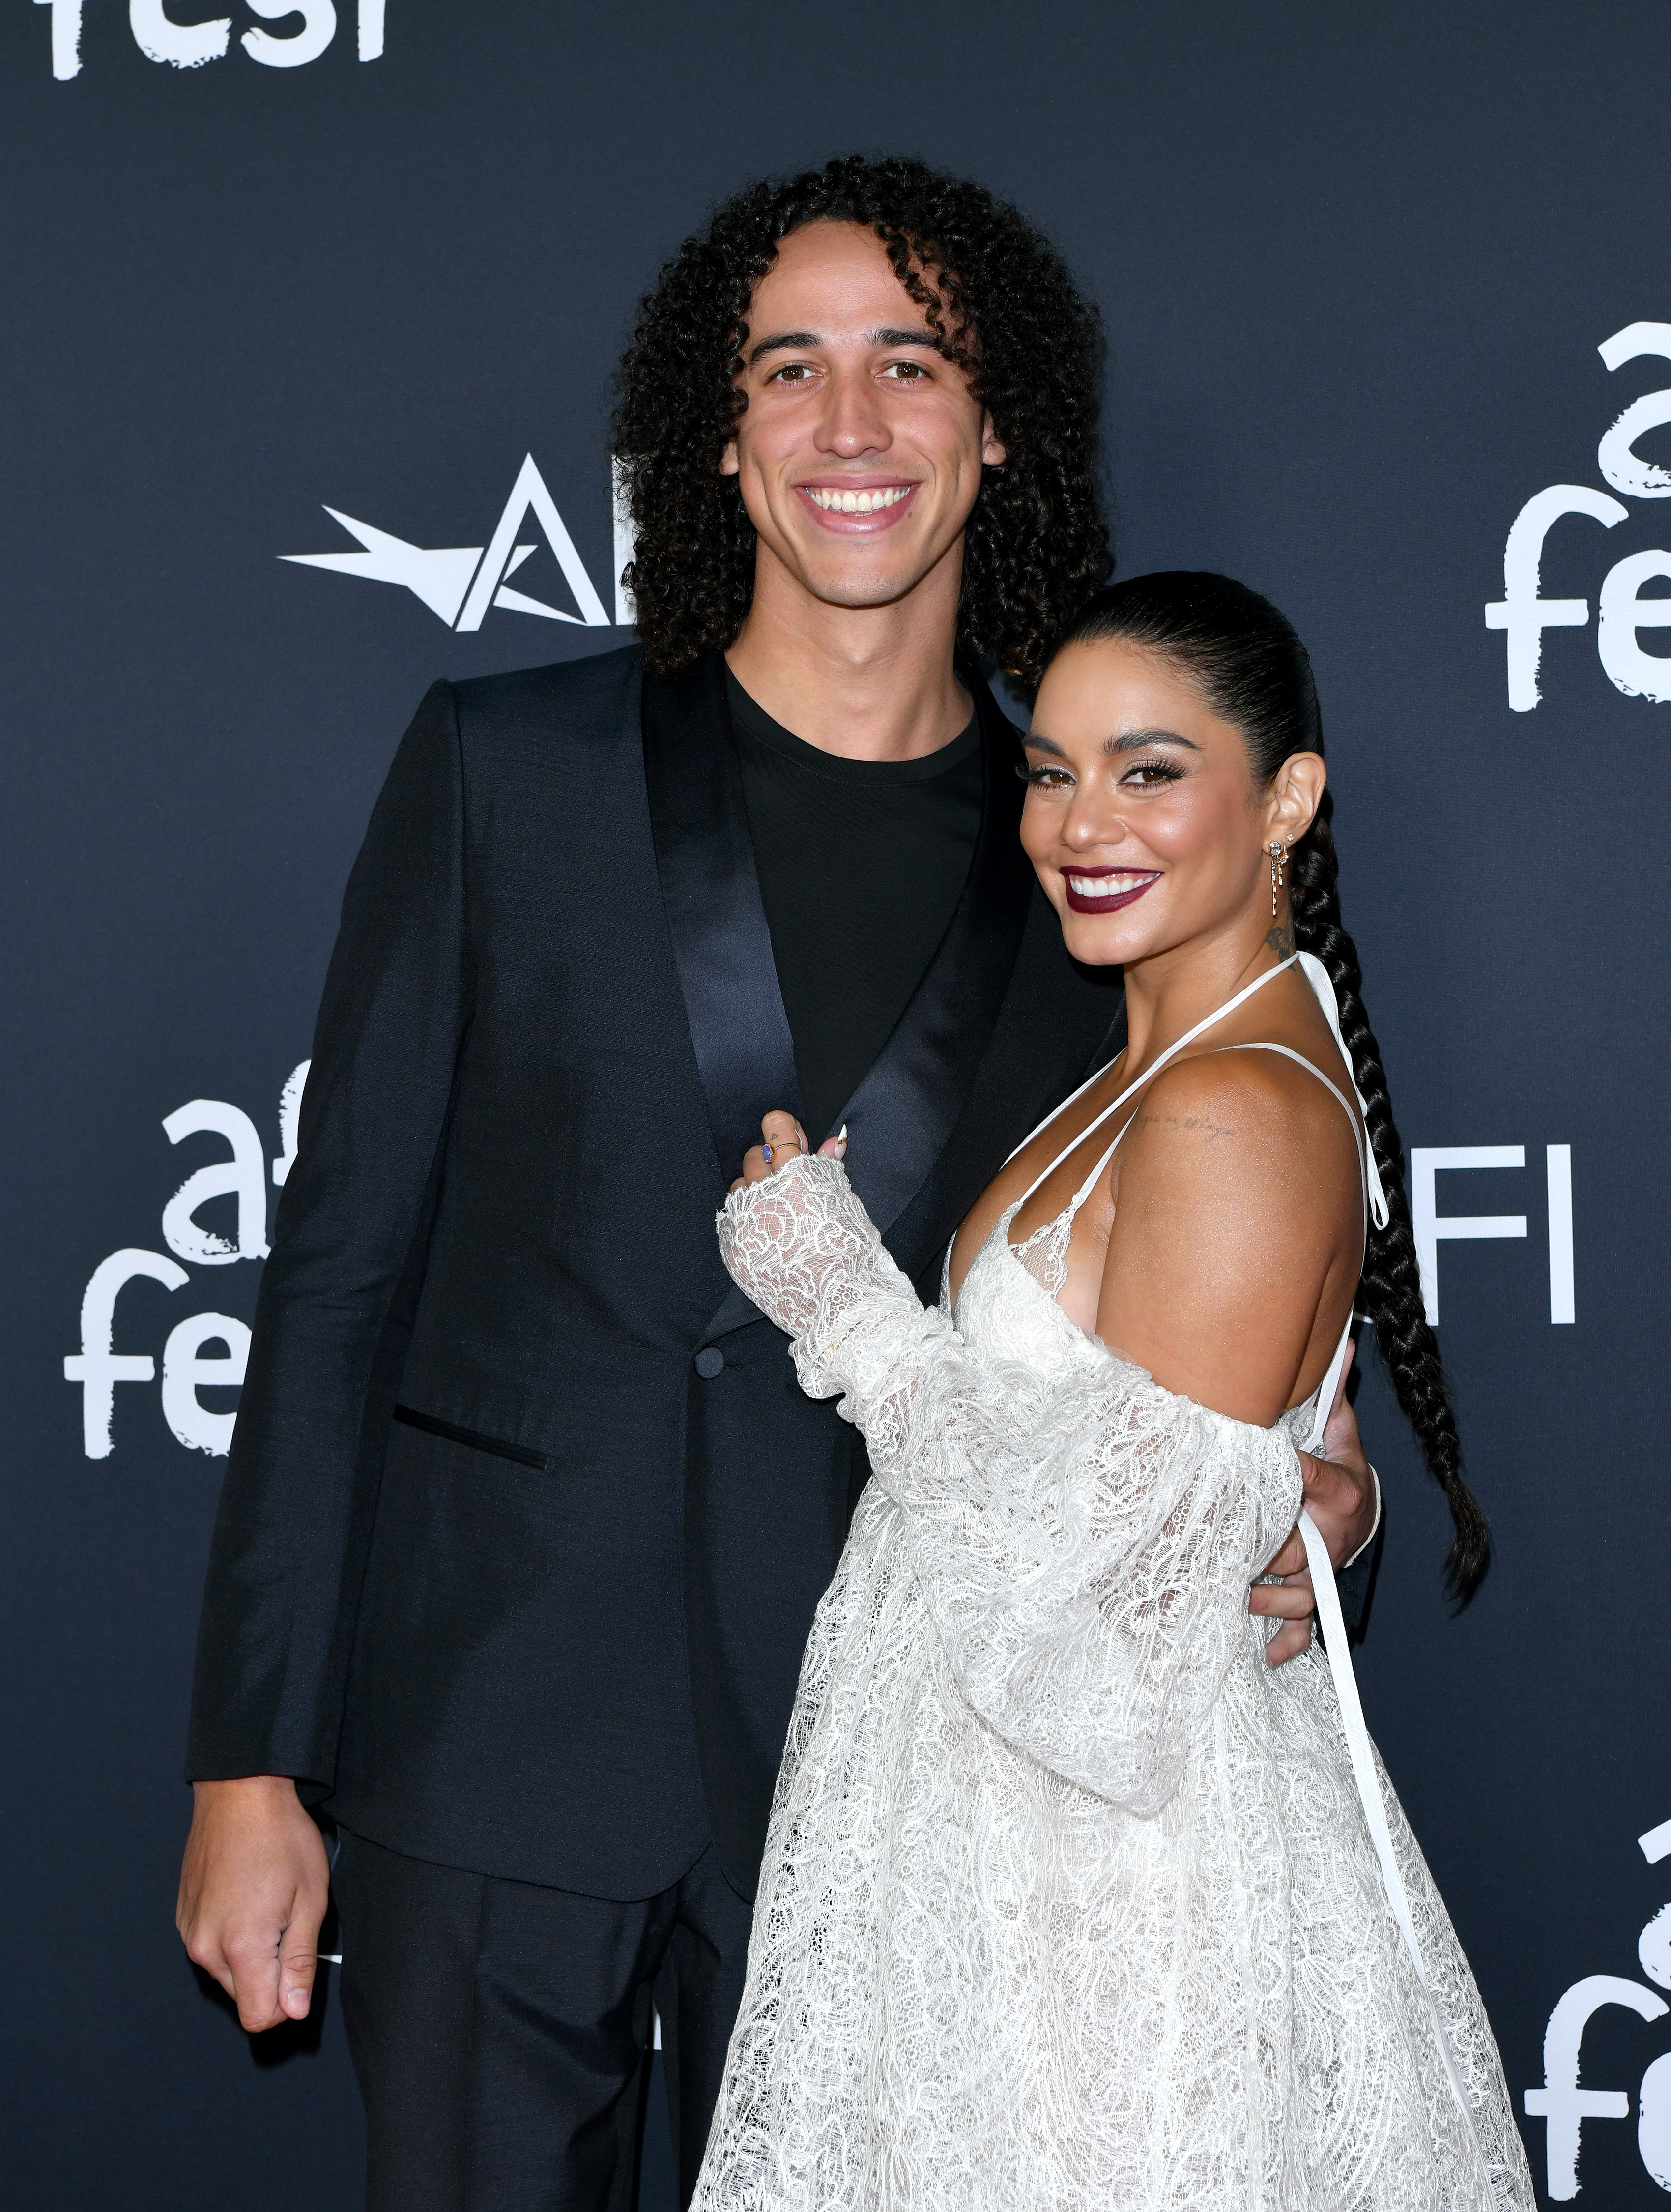 Vanessa pictured with her husband Cole Tucker at an event in November 2021